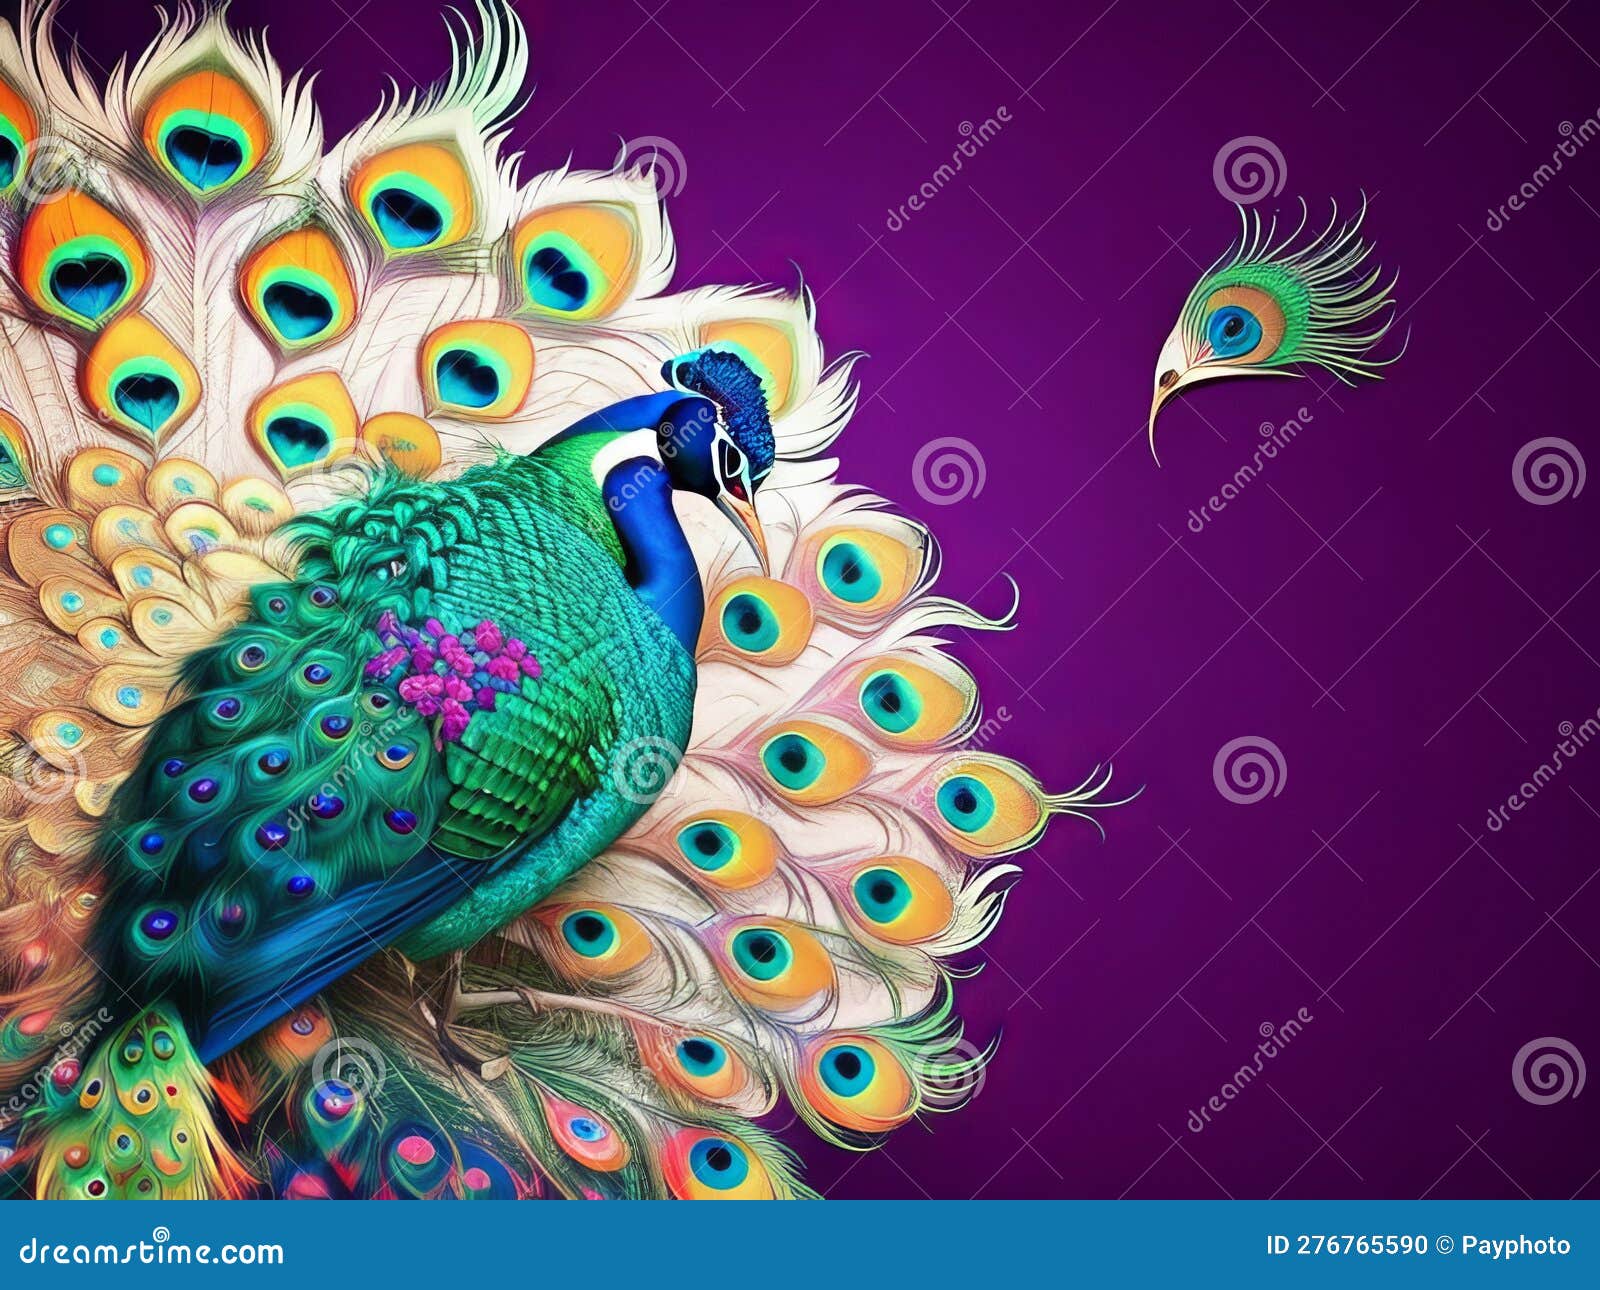 500573 High Resolution Wallpaper  peacock  Rare Gallery HD Wallpapers